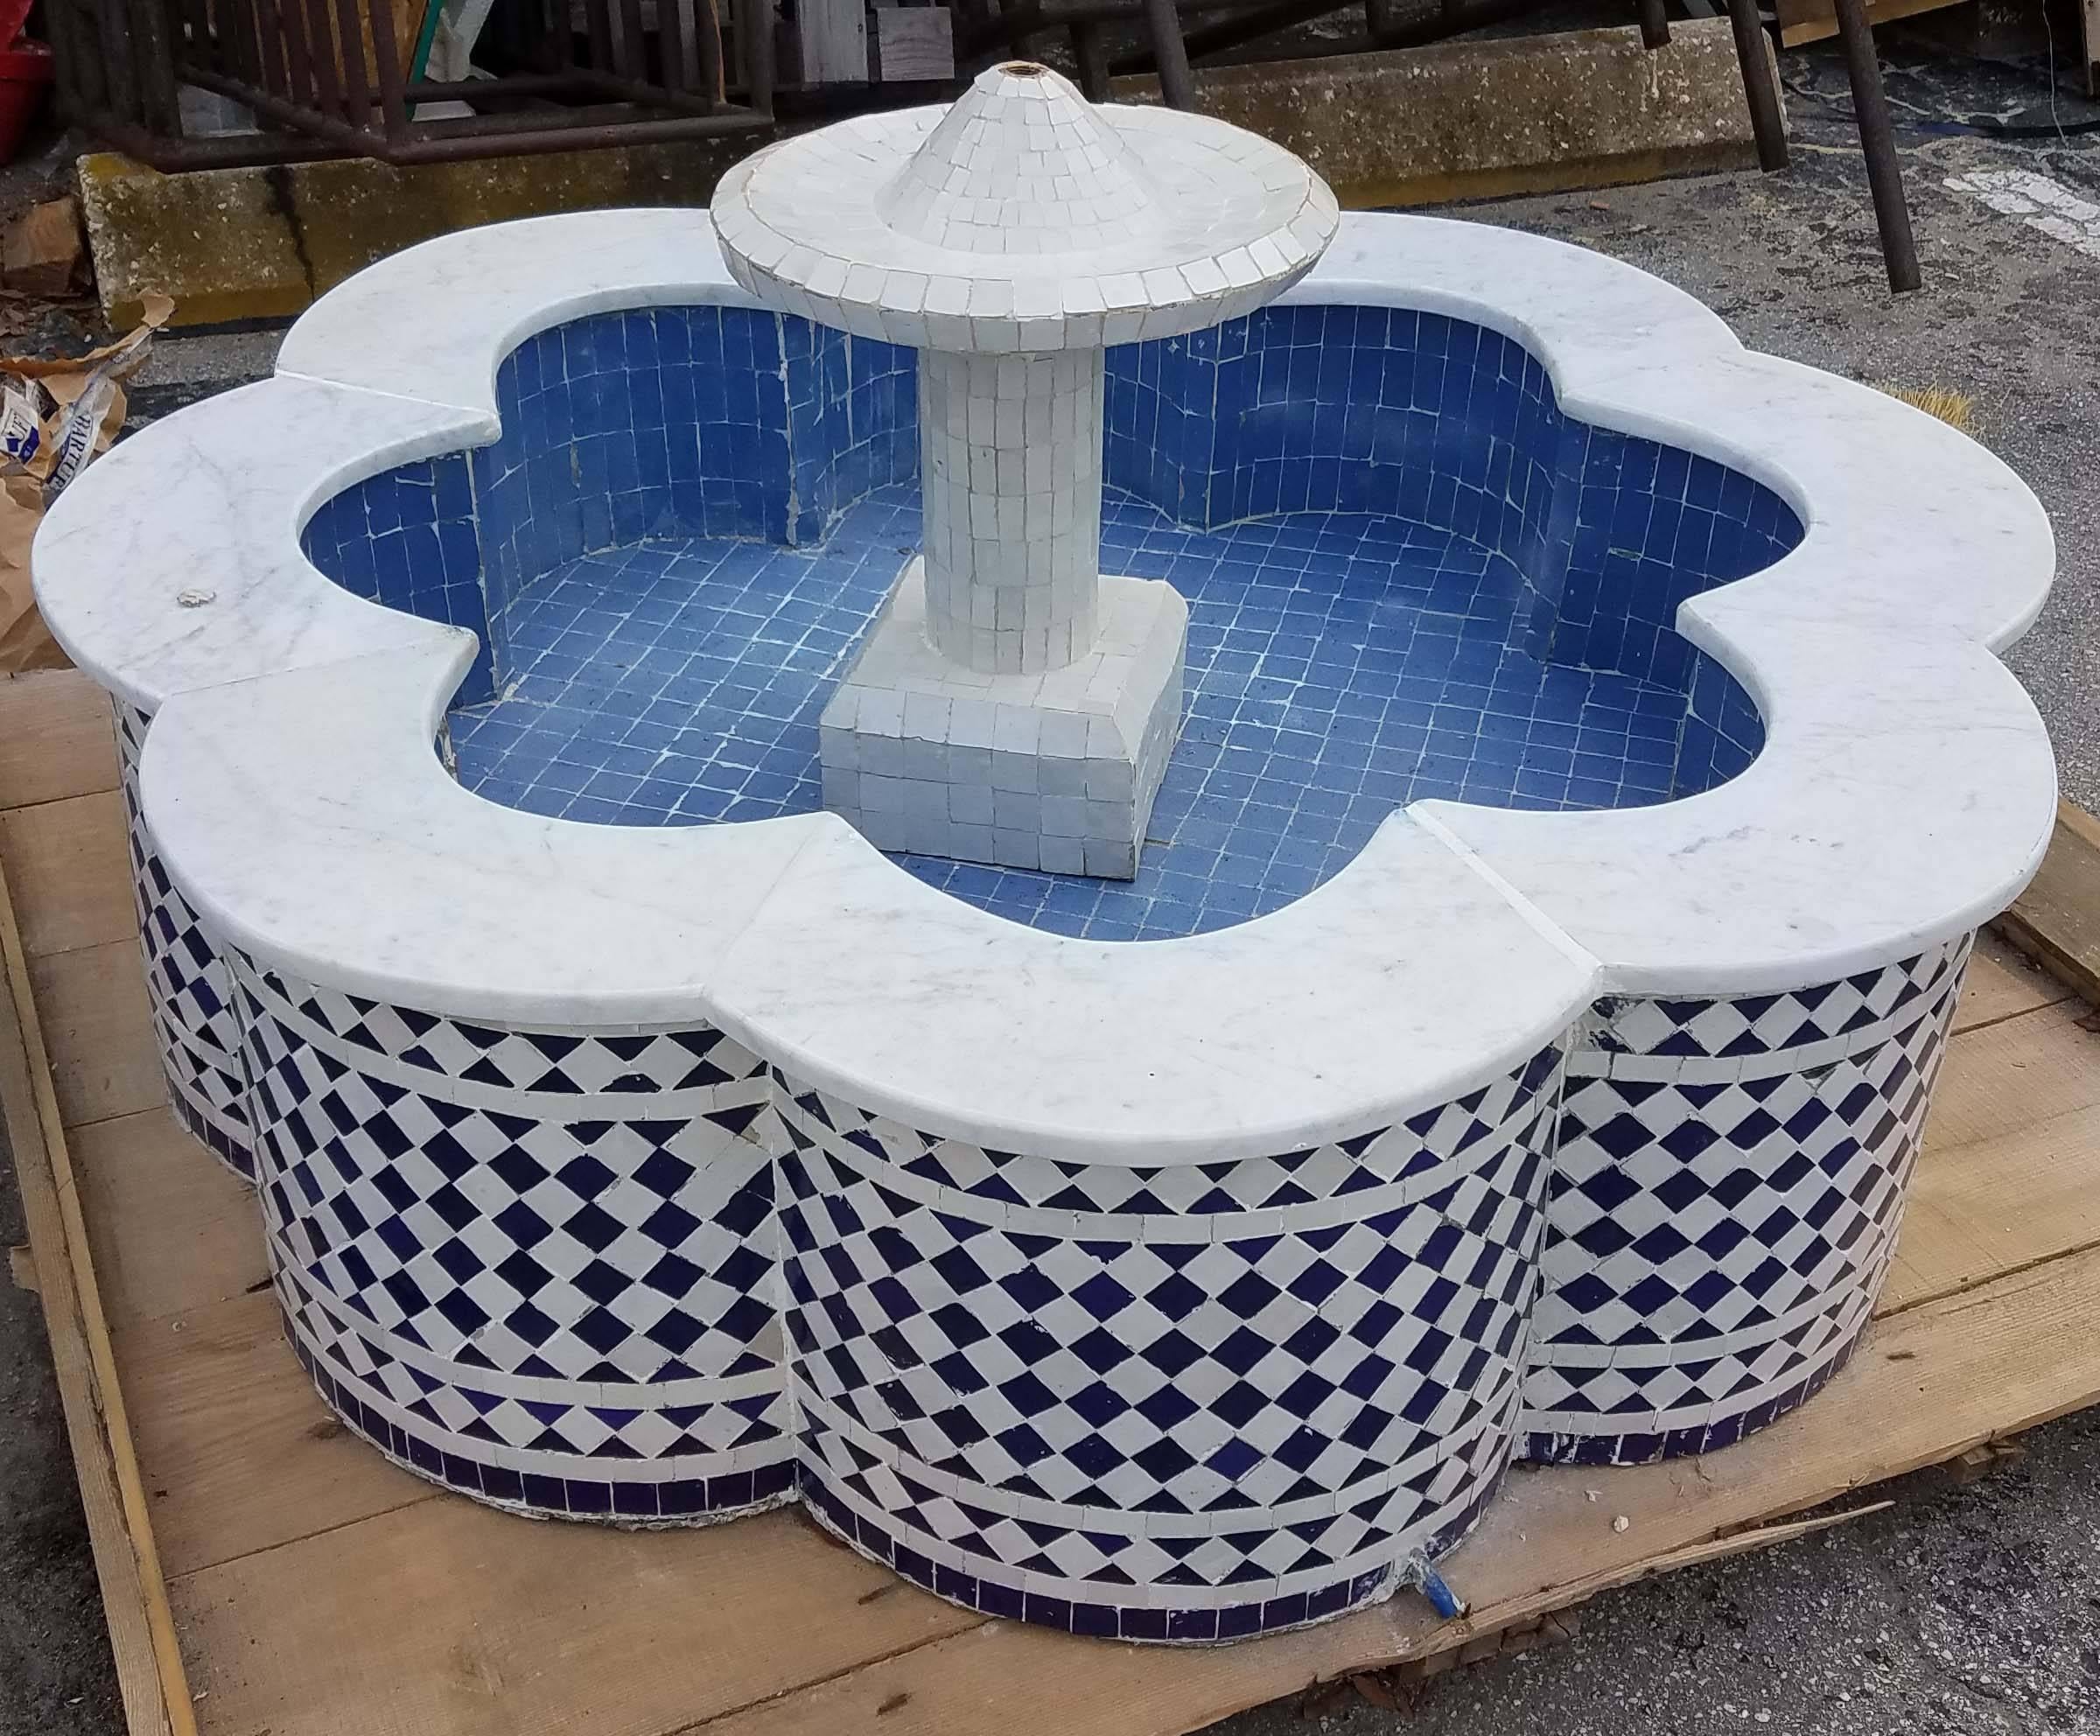 This is a typical Moroccan Mosaic fountain handmade in Marrakech. This fountain is usually found in courtyards and Riads all over Morocco. It measures approximately 50 in diameter and 22 in height and weighs about 325 lbs. Please contact us if you